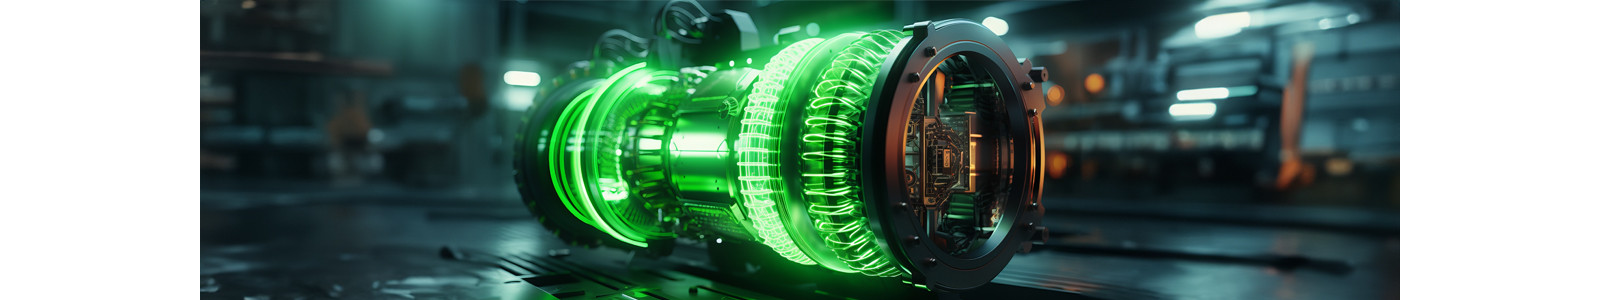 A mechanical device lightning with green color